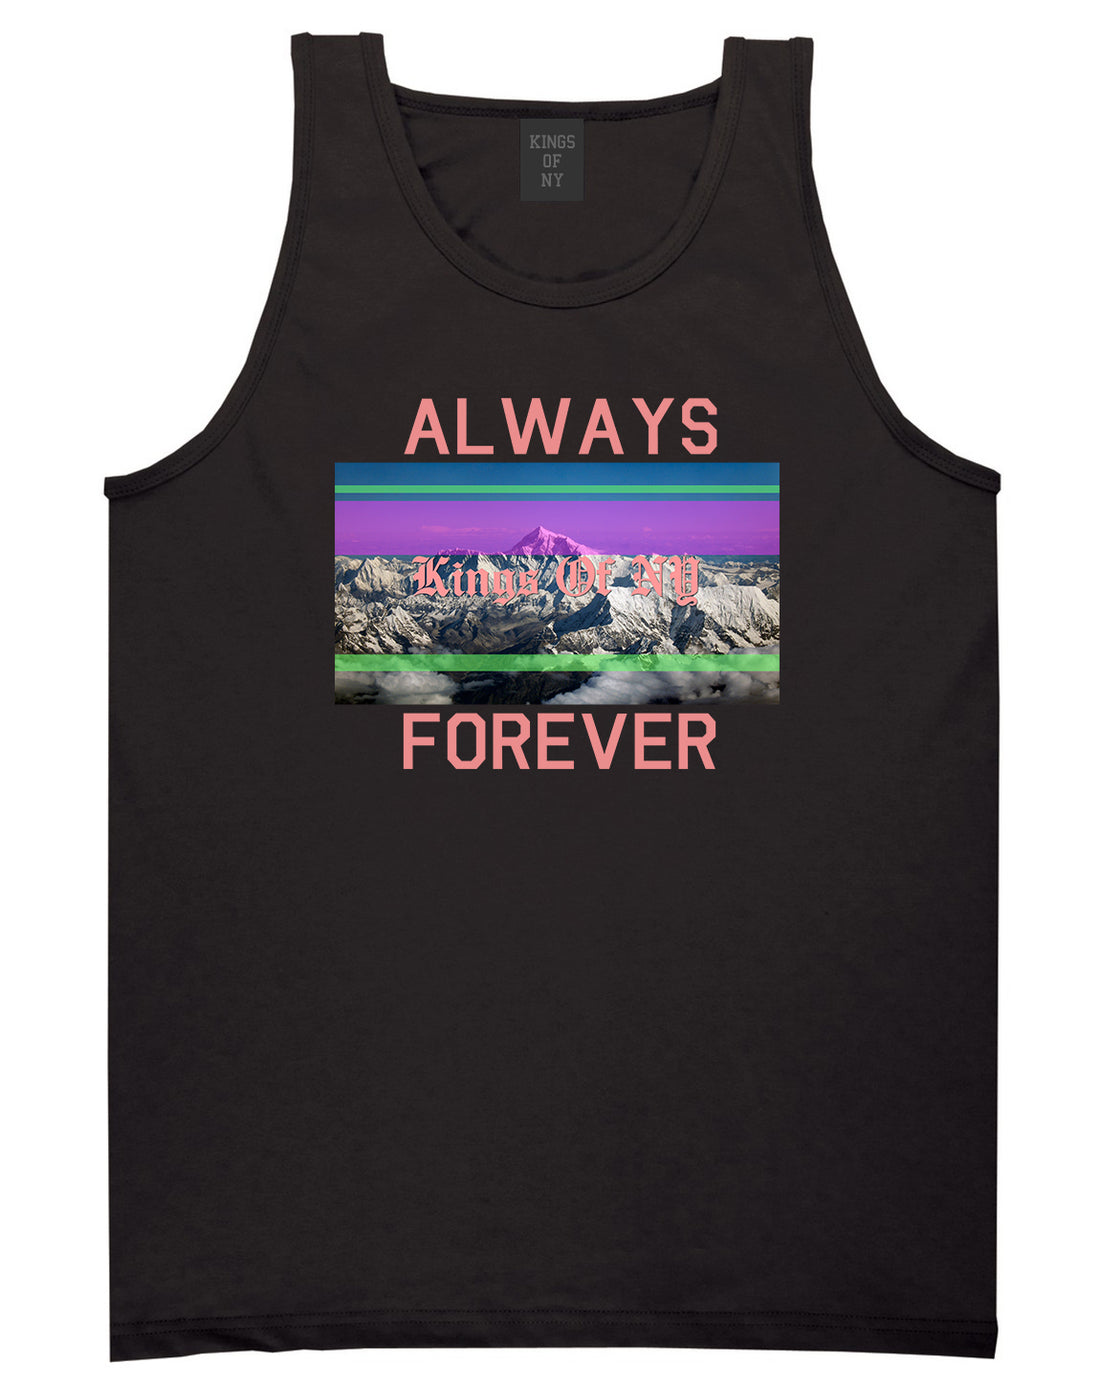 Mountains Always And Forever Mens Tank Top Shirt Black by Kings Of NY